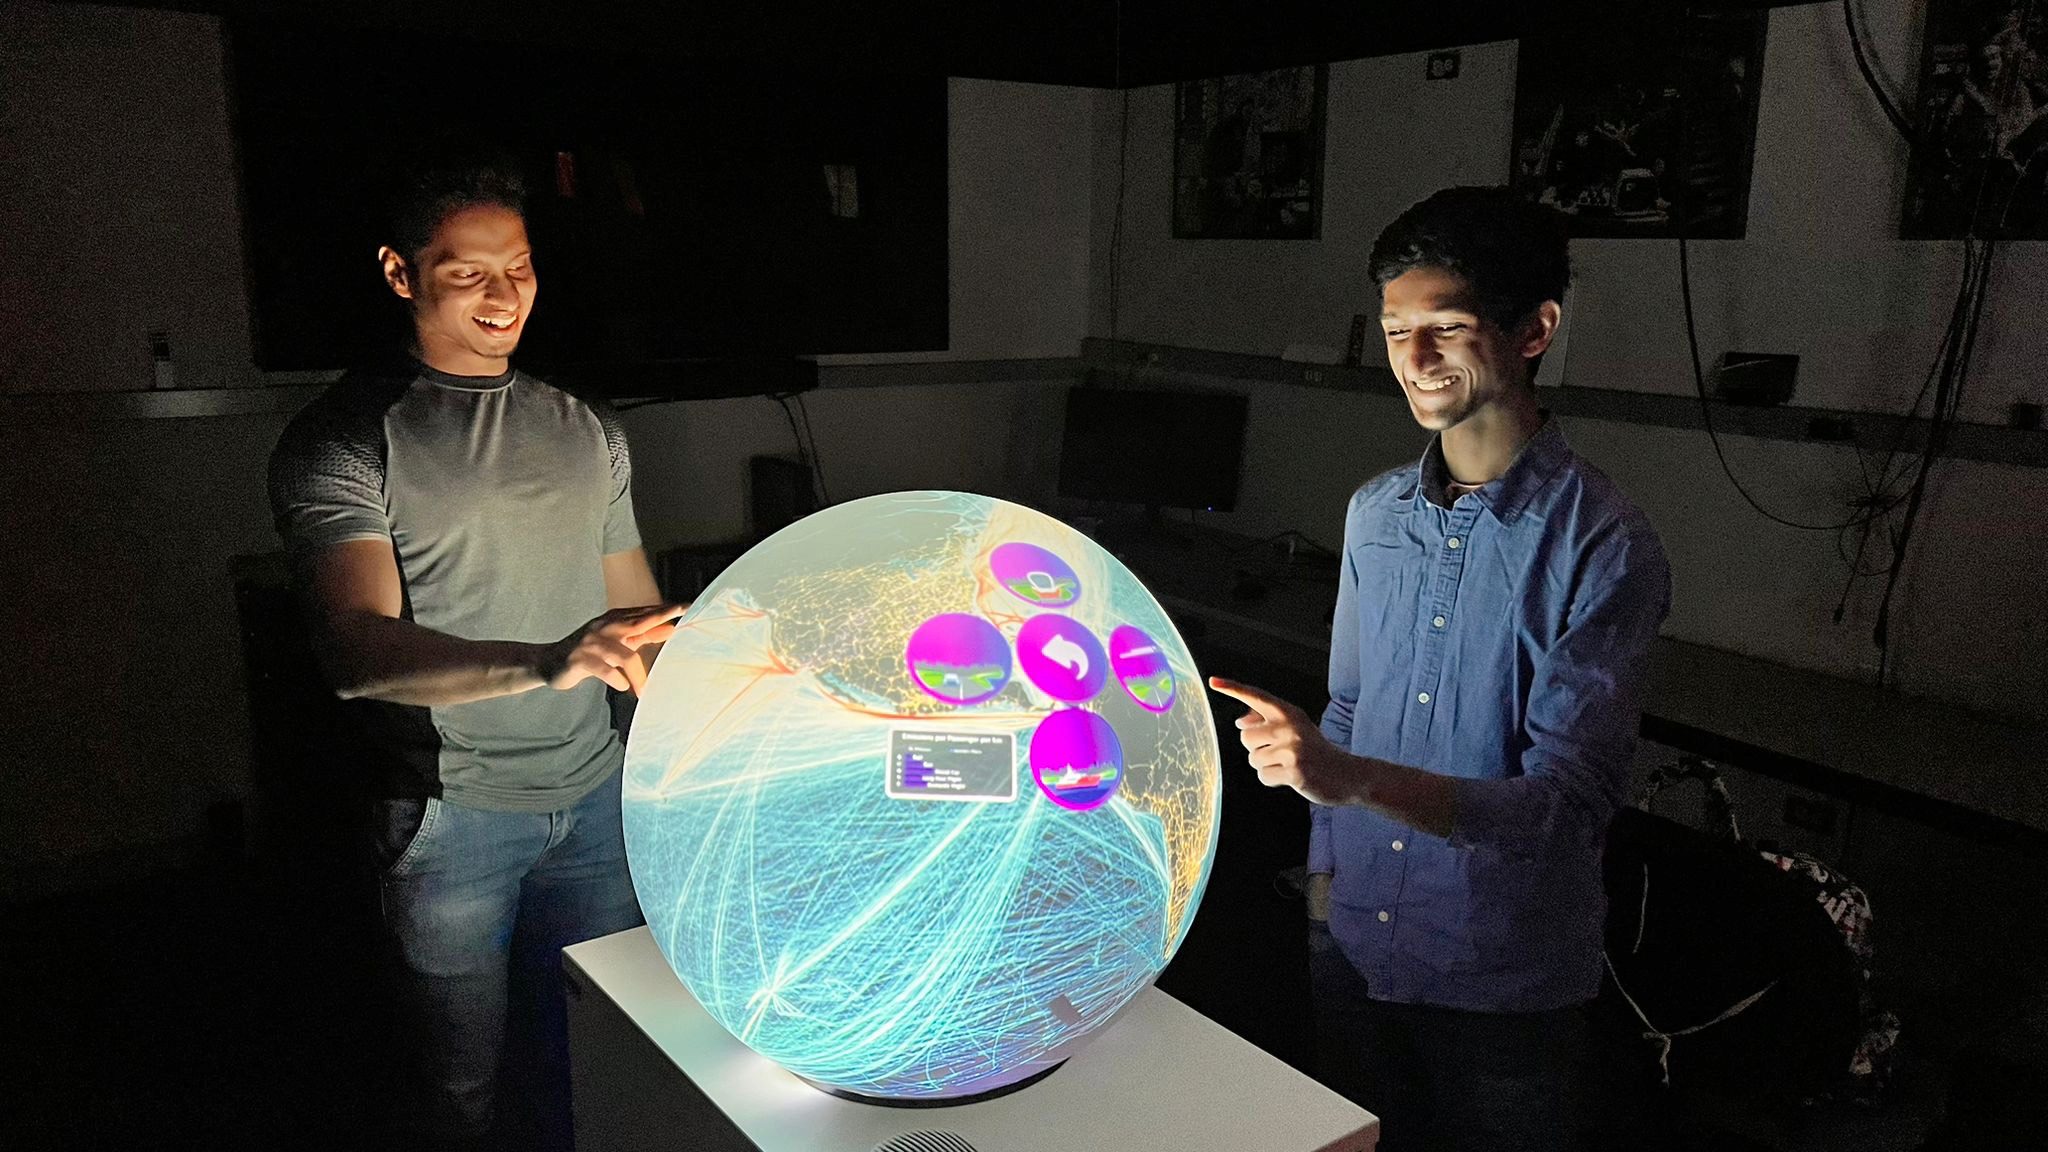 The data visualization application running on the multi-touch spherical display was developed by <a href="https://pufferfishdisplays.com/">Pufferfish.Ltd.</a>